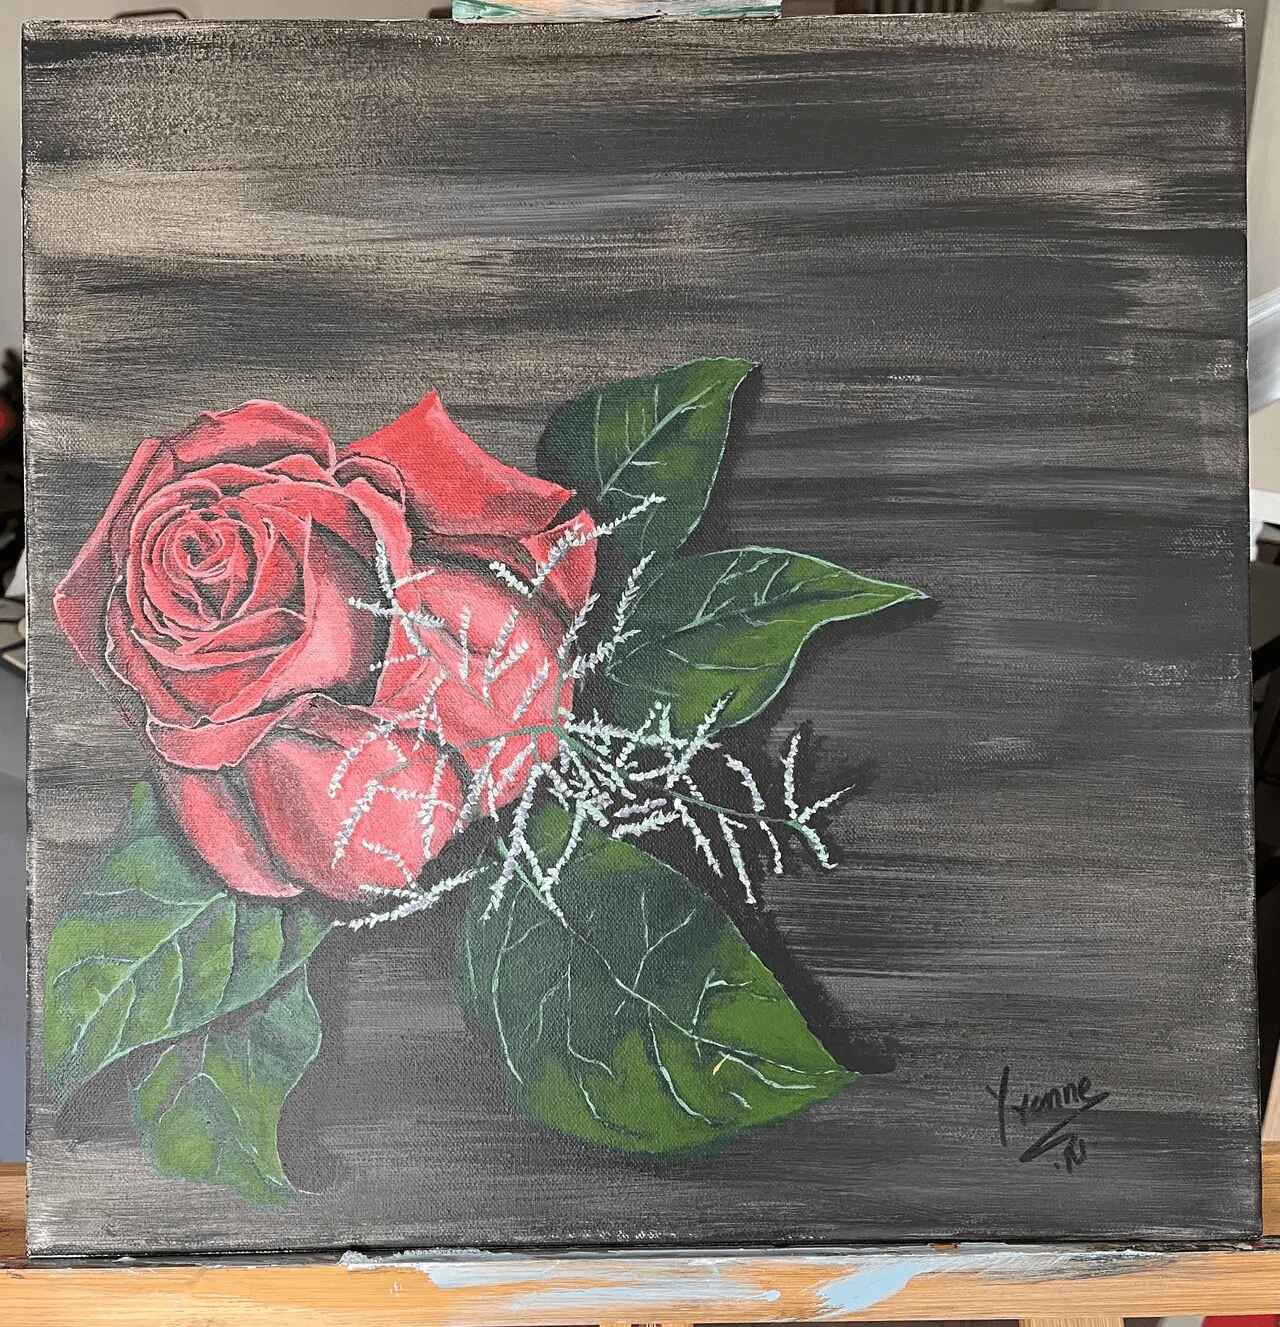 A painting of a rose on wood